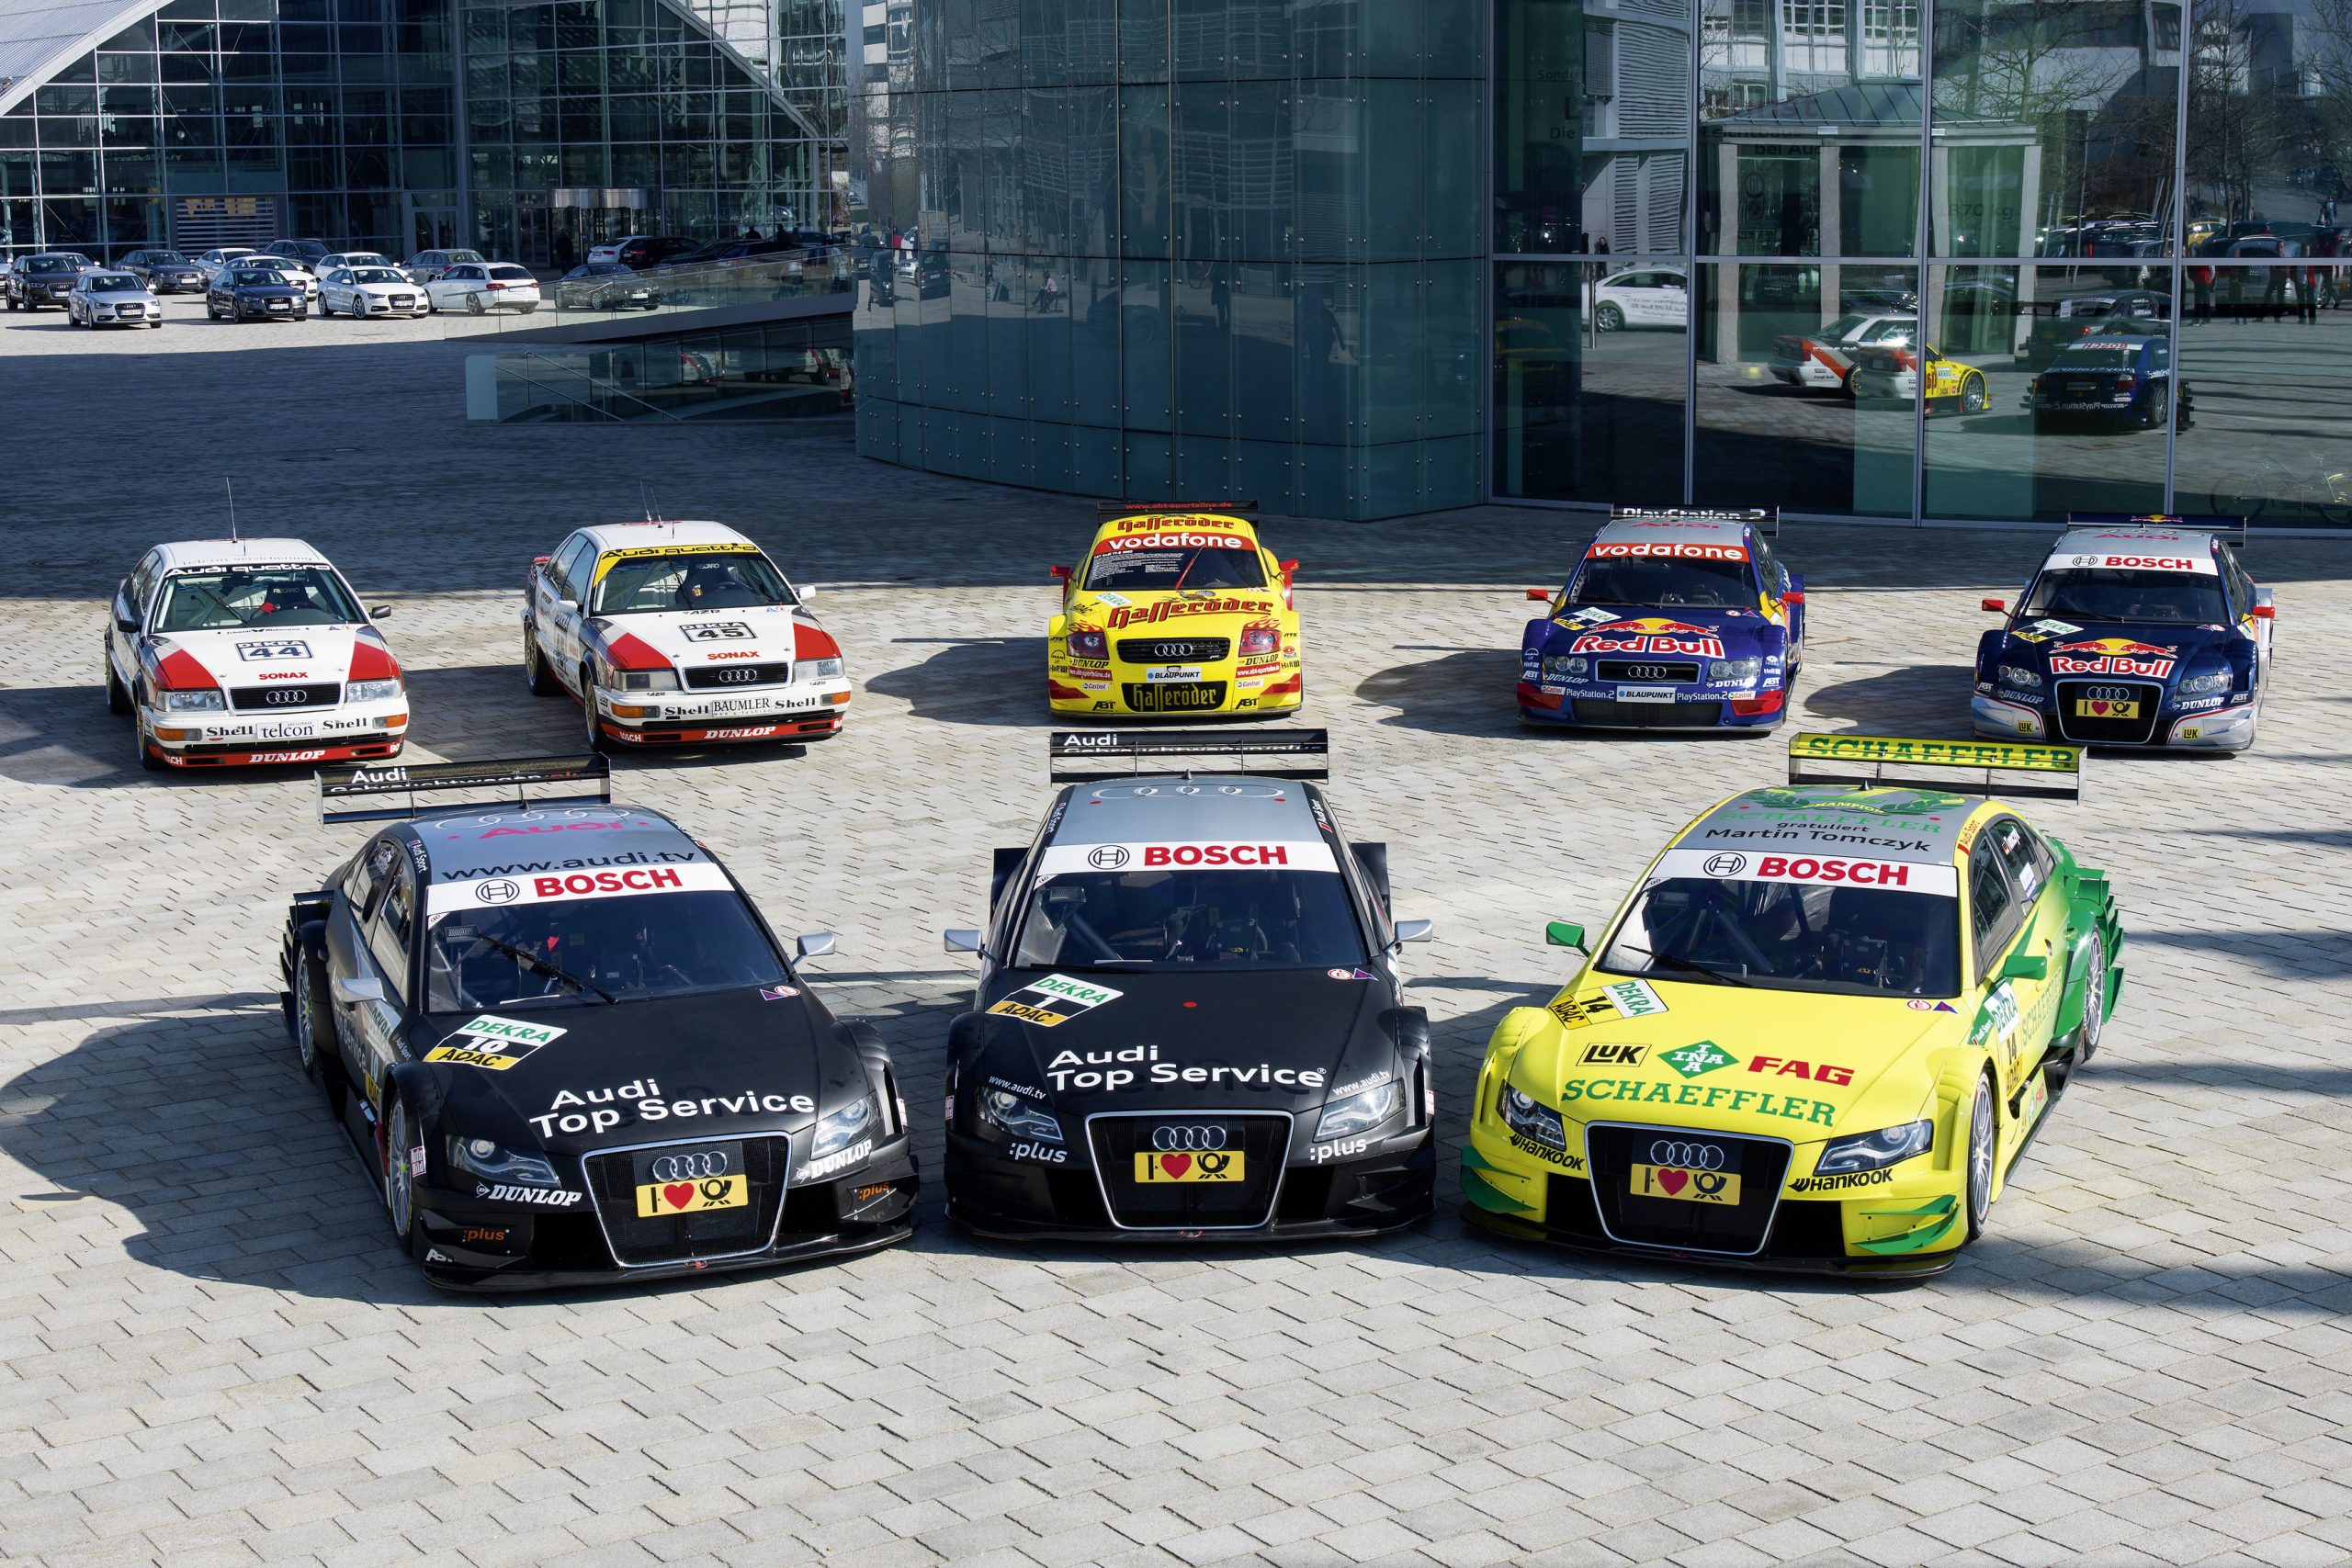 2011: The DTM winning cars from 1990, 1991, 2002, 2004, 2007, 2008, 2009 and 2011